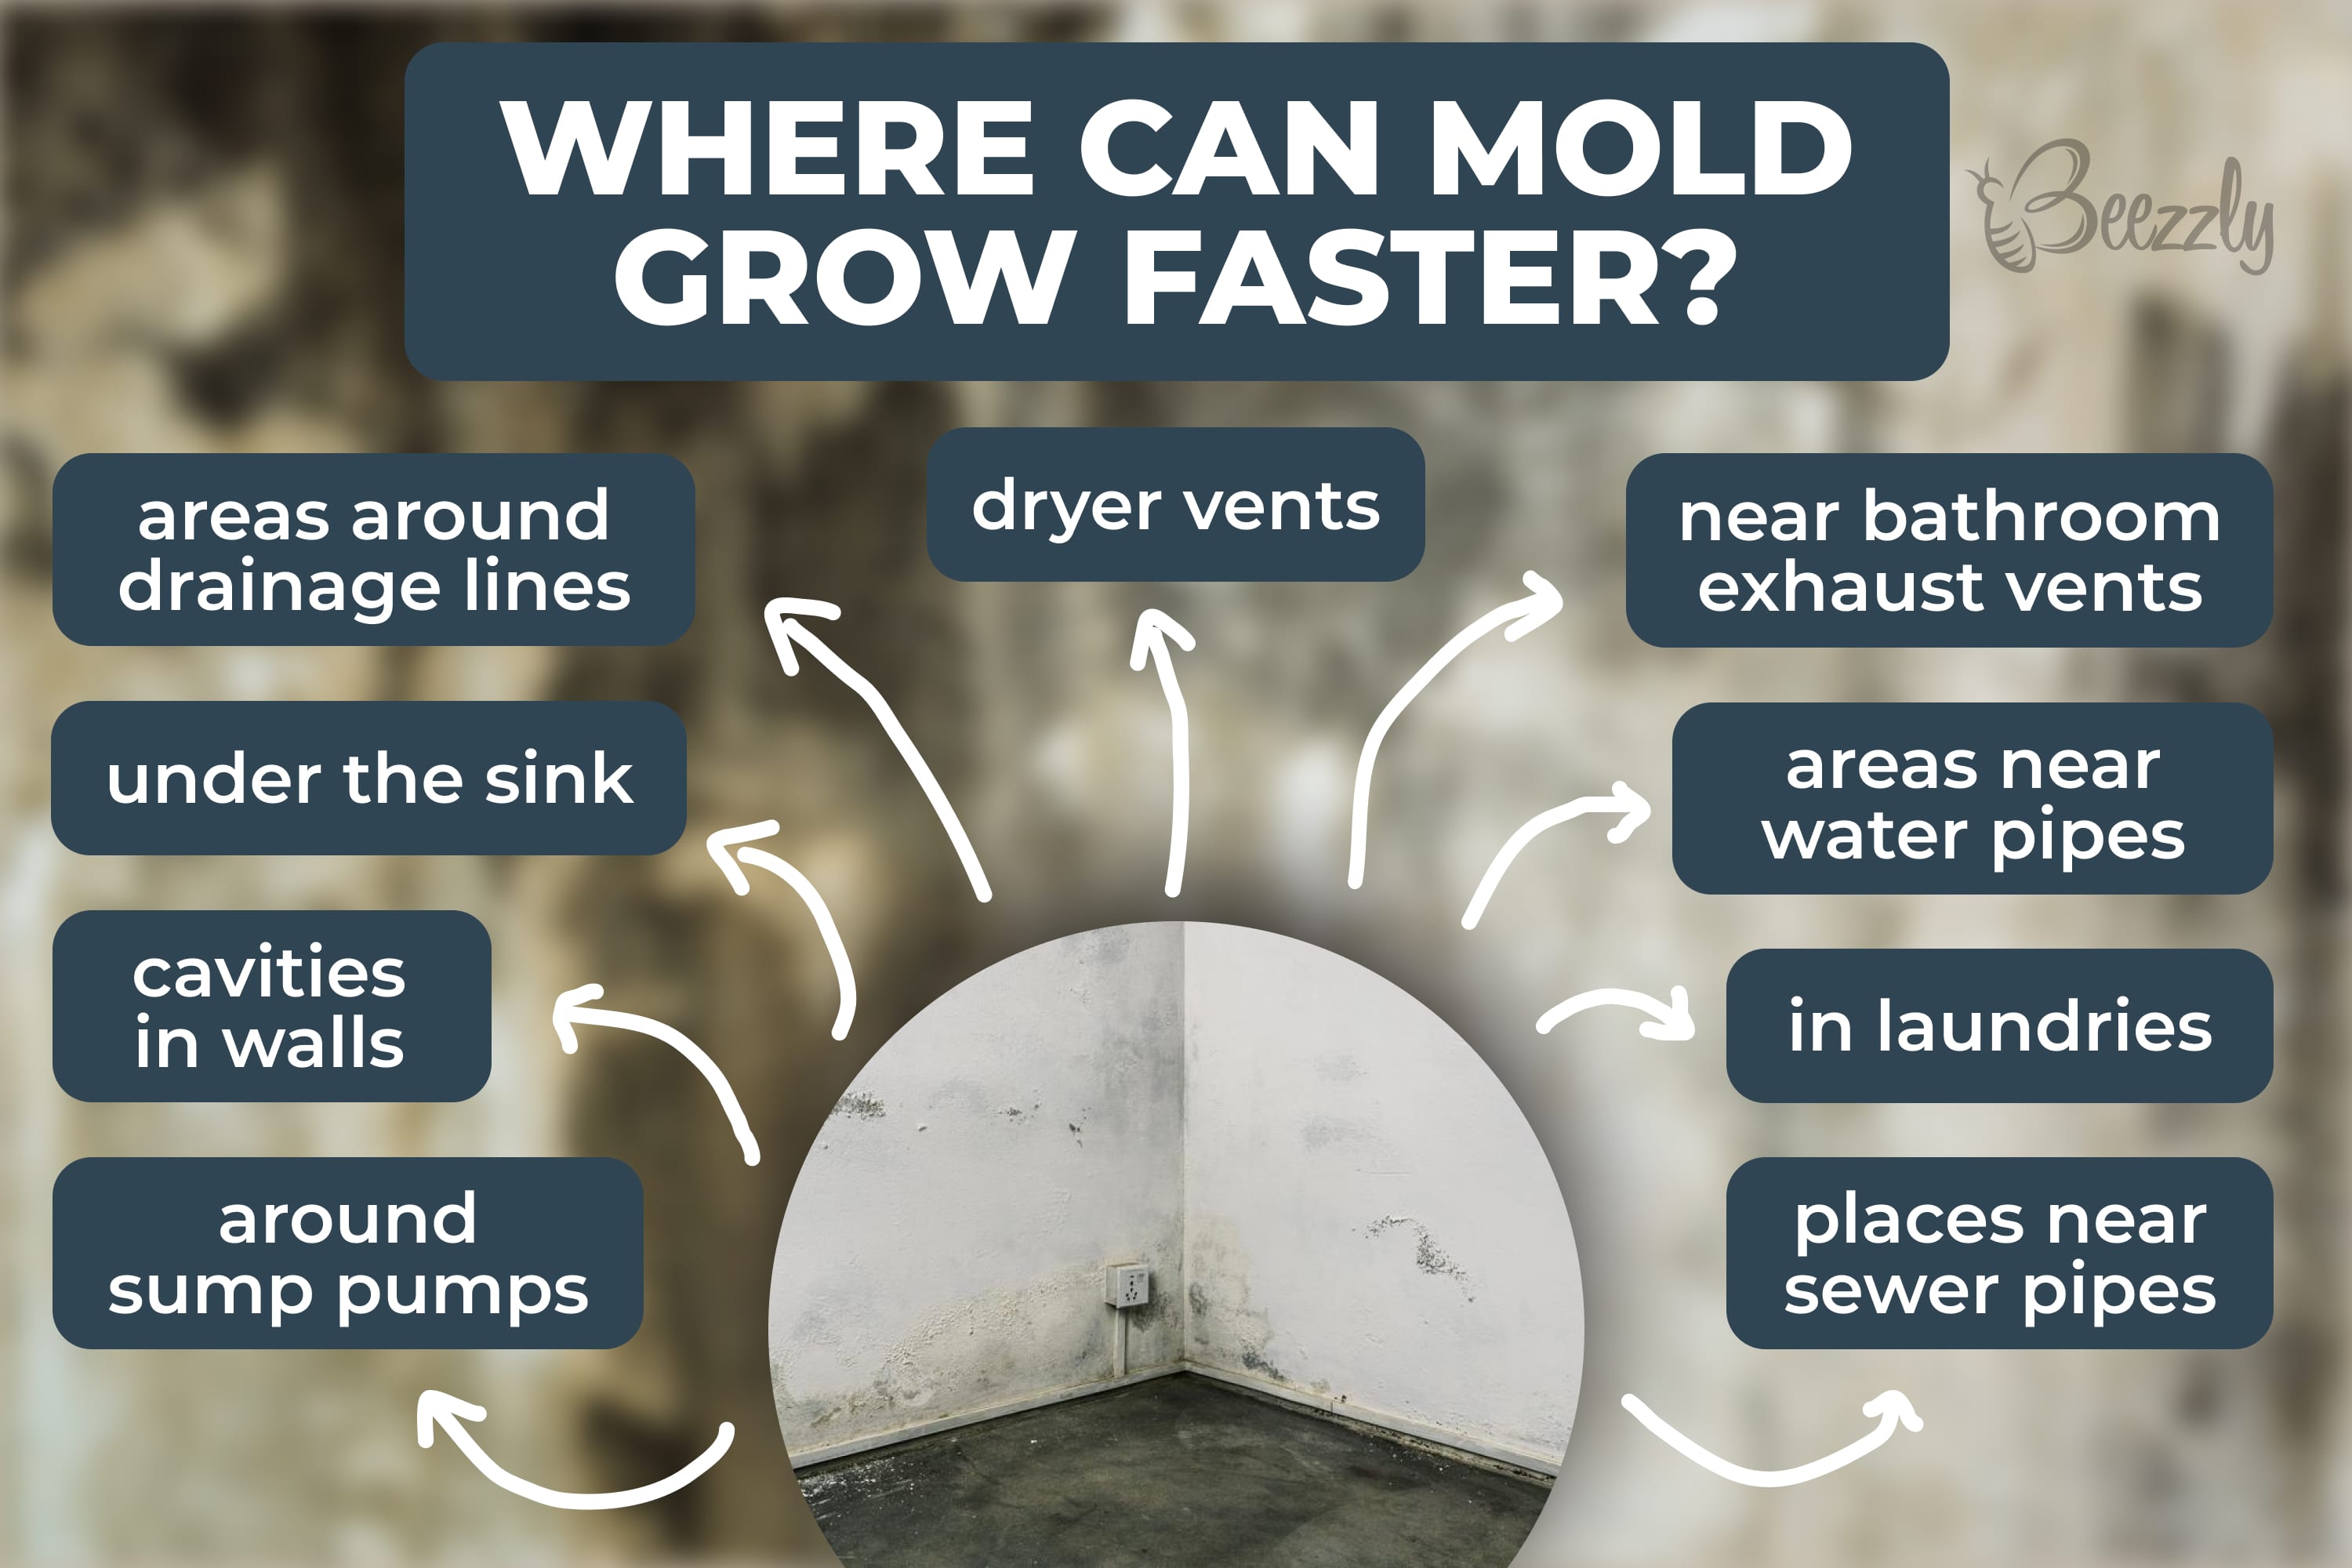 Where can mold grow faster